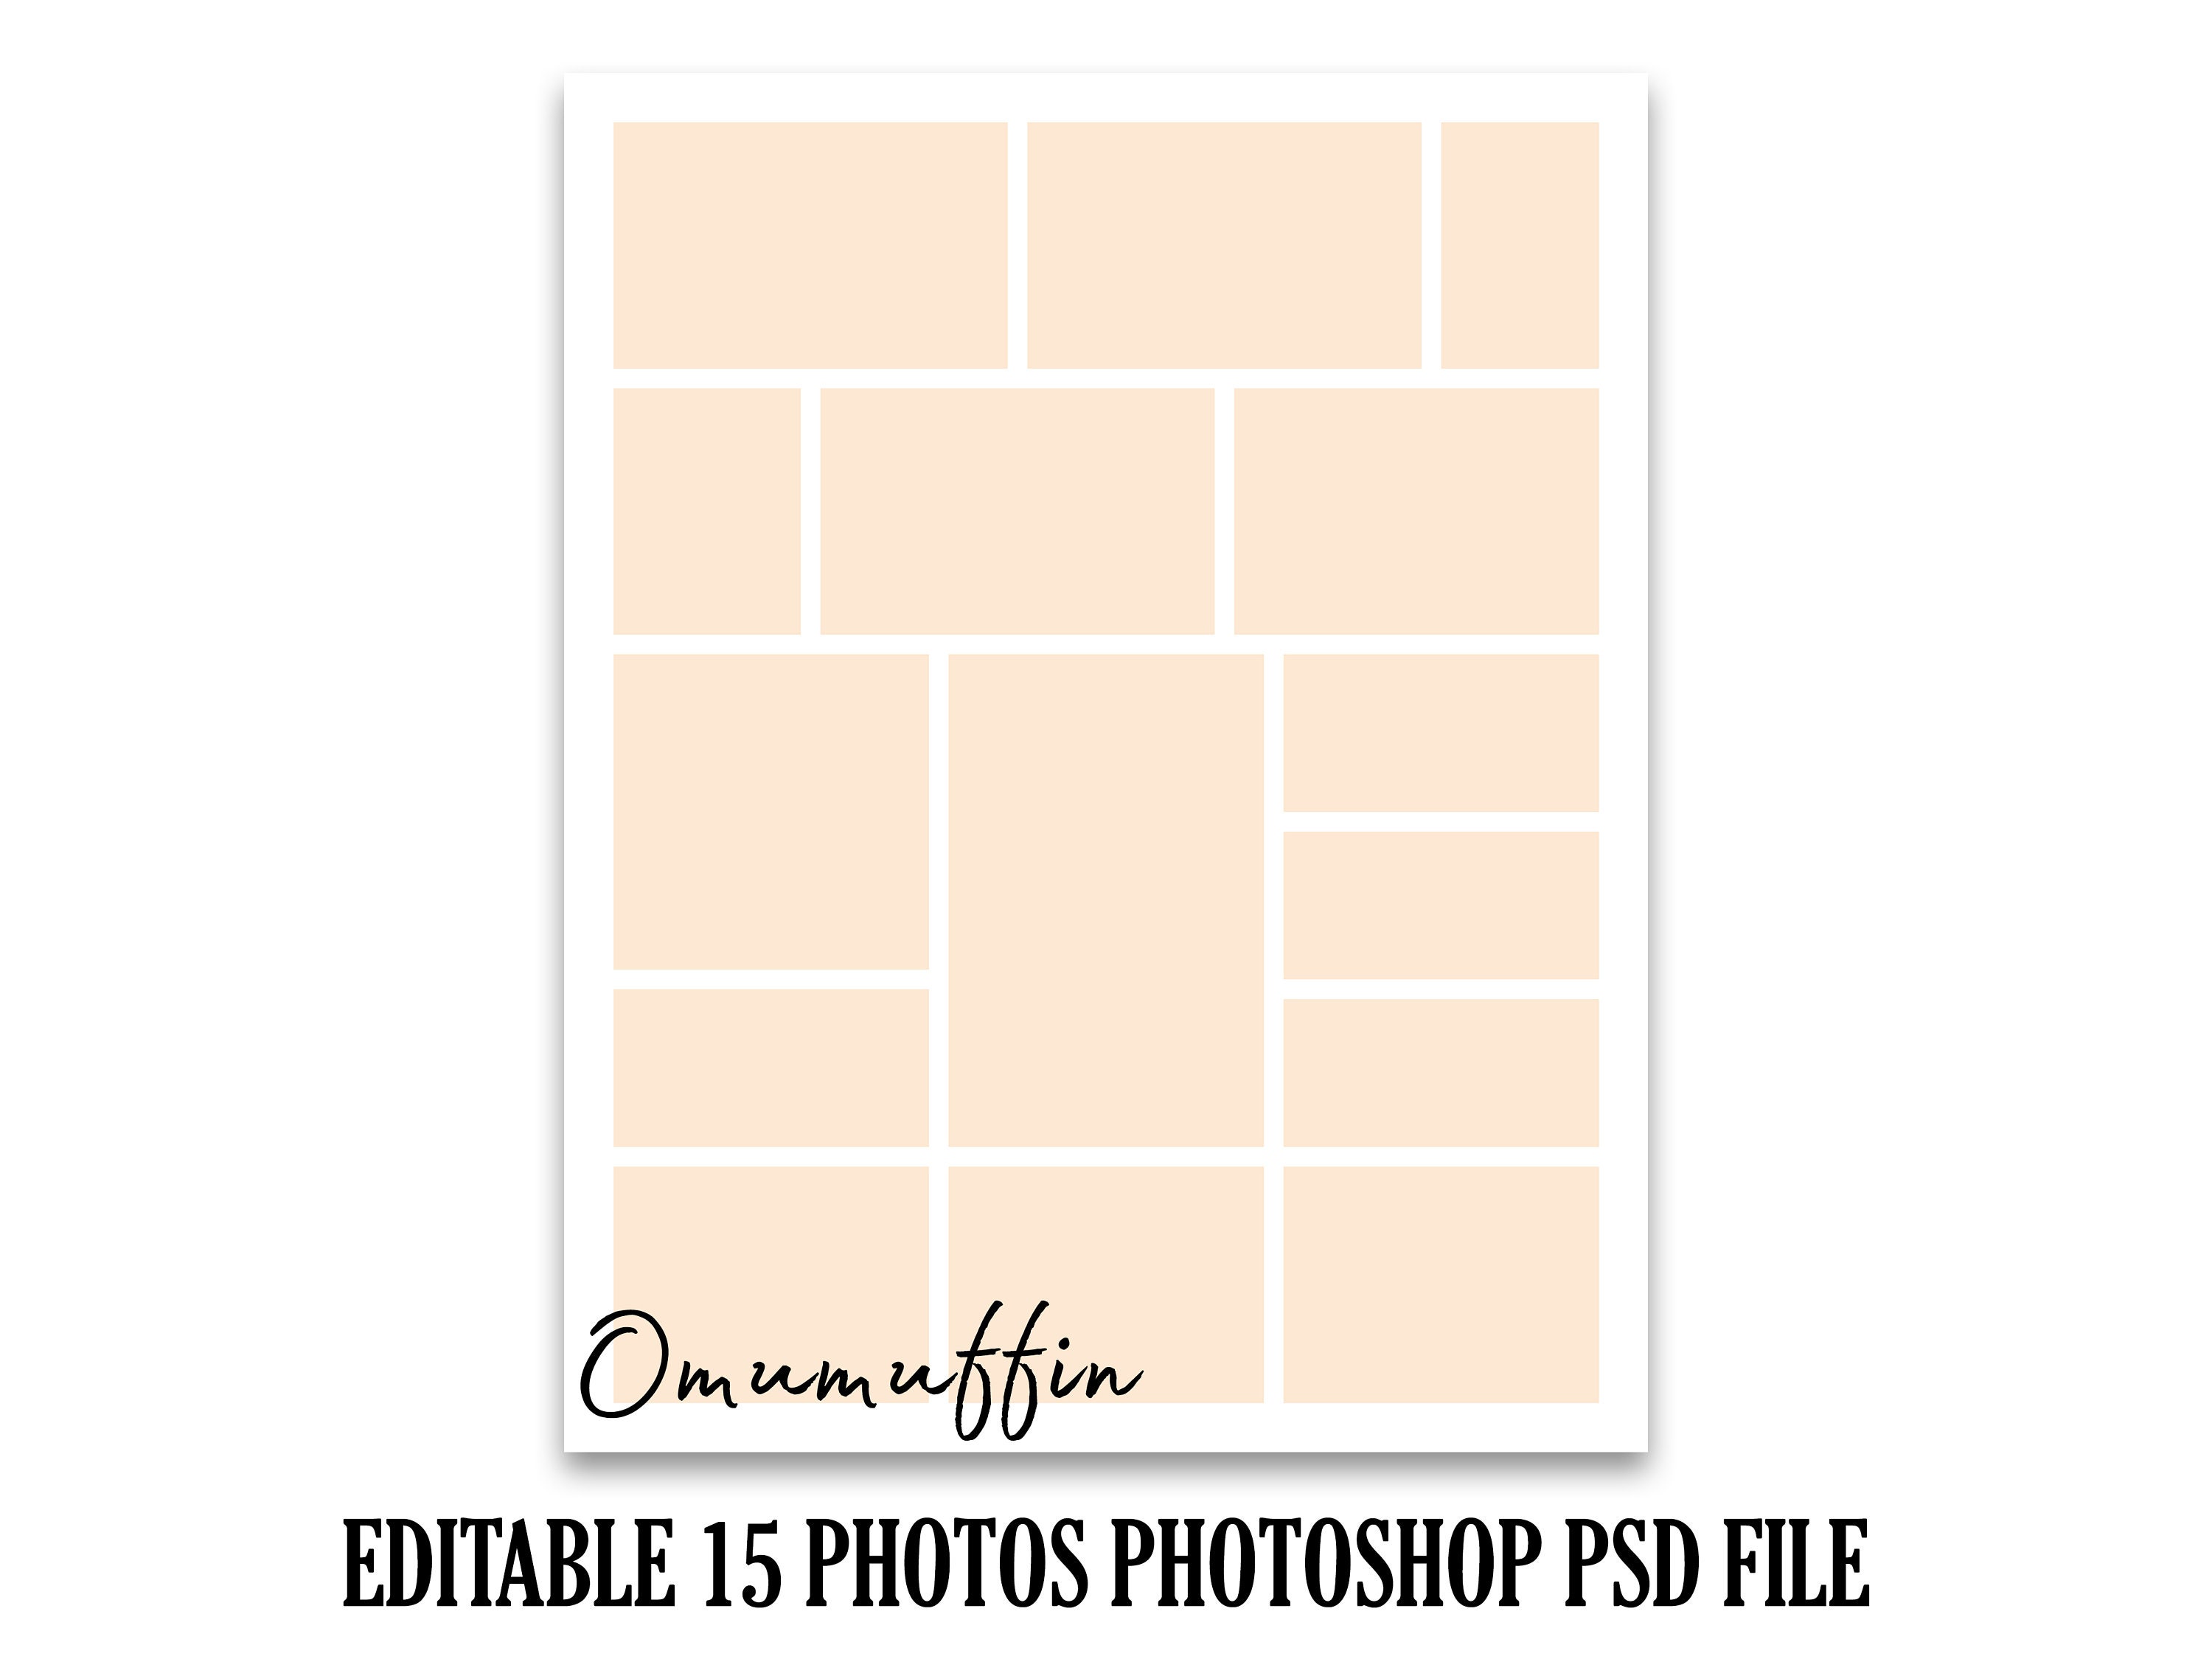 11x14 Photo Collage Template for 15 Photos Wedding Composite Storyboard ...